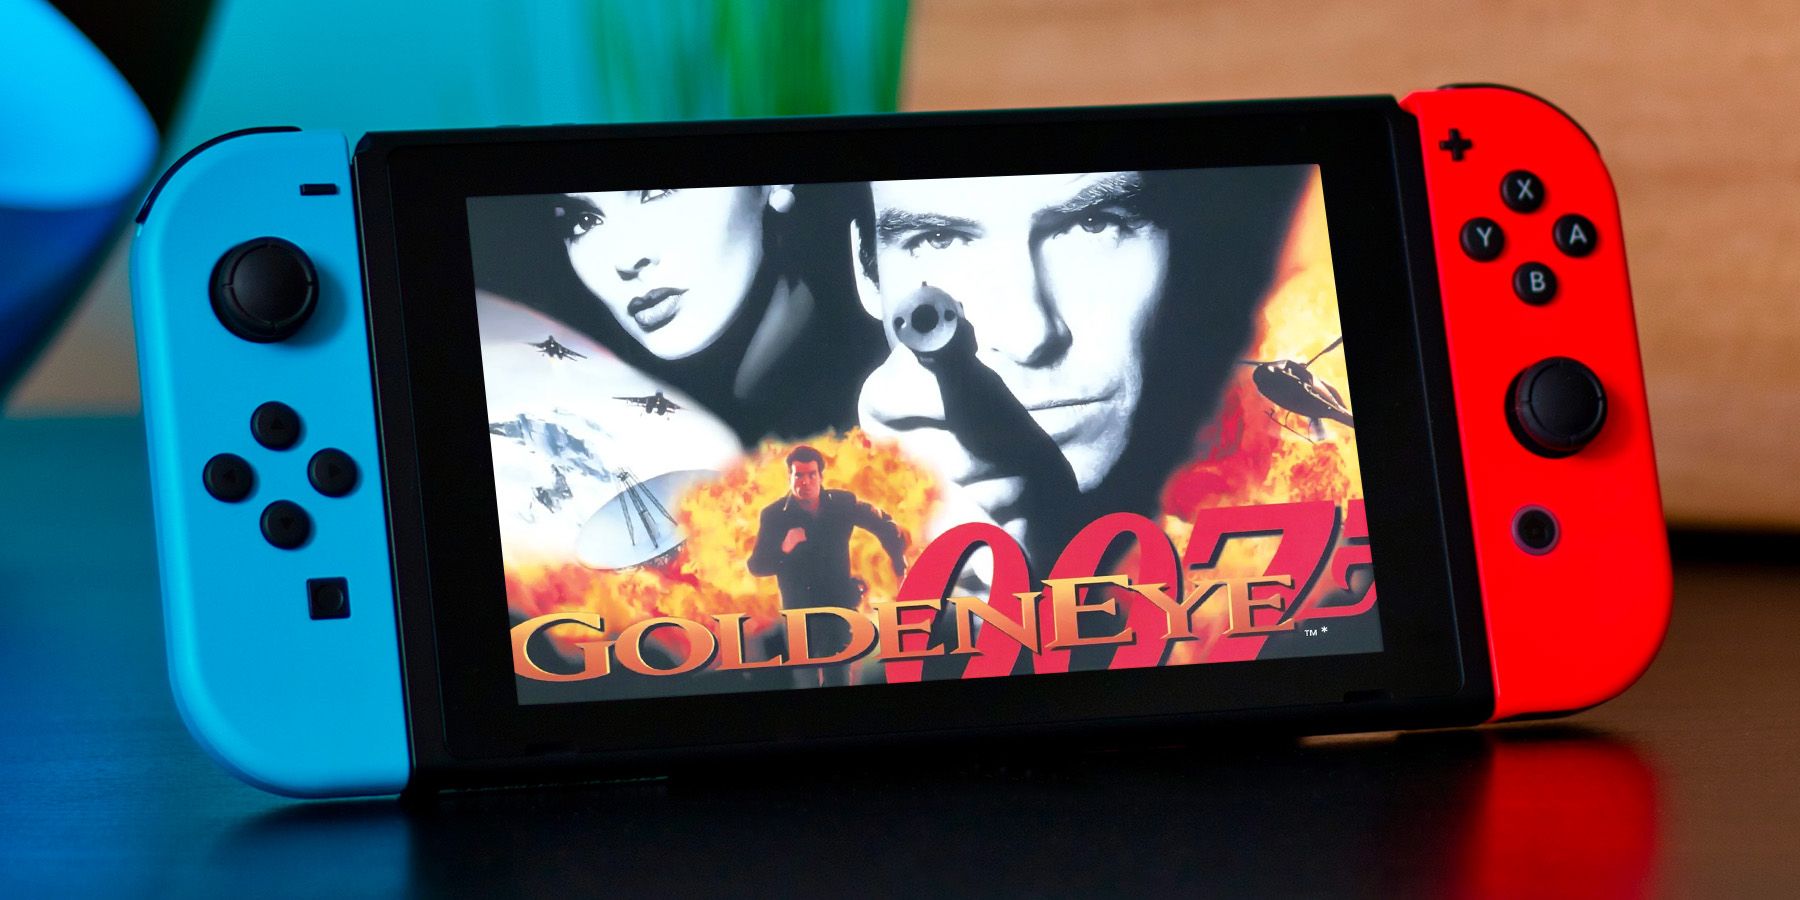 GoldenEye 007 Hits Nintendo Switch, Xbox: How to Play and Fix